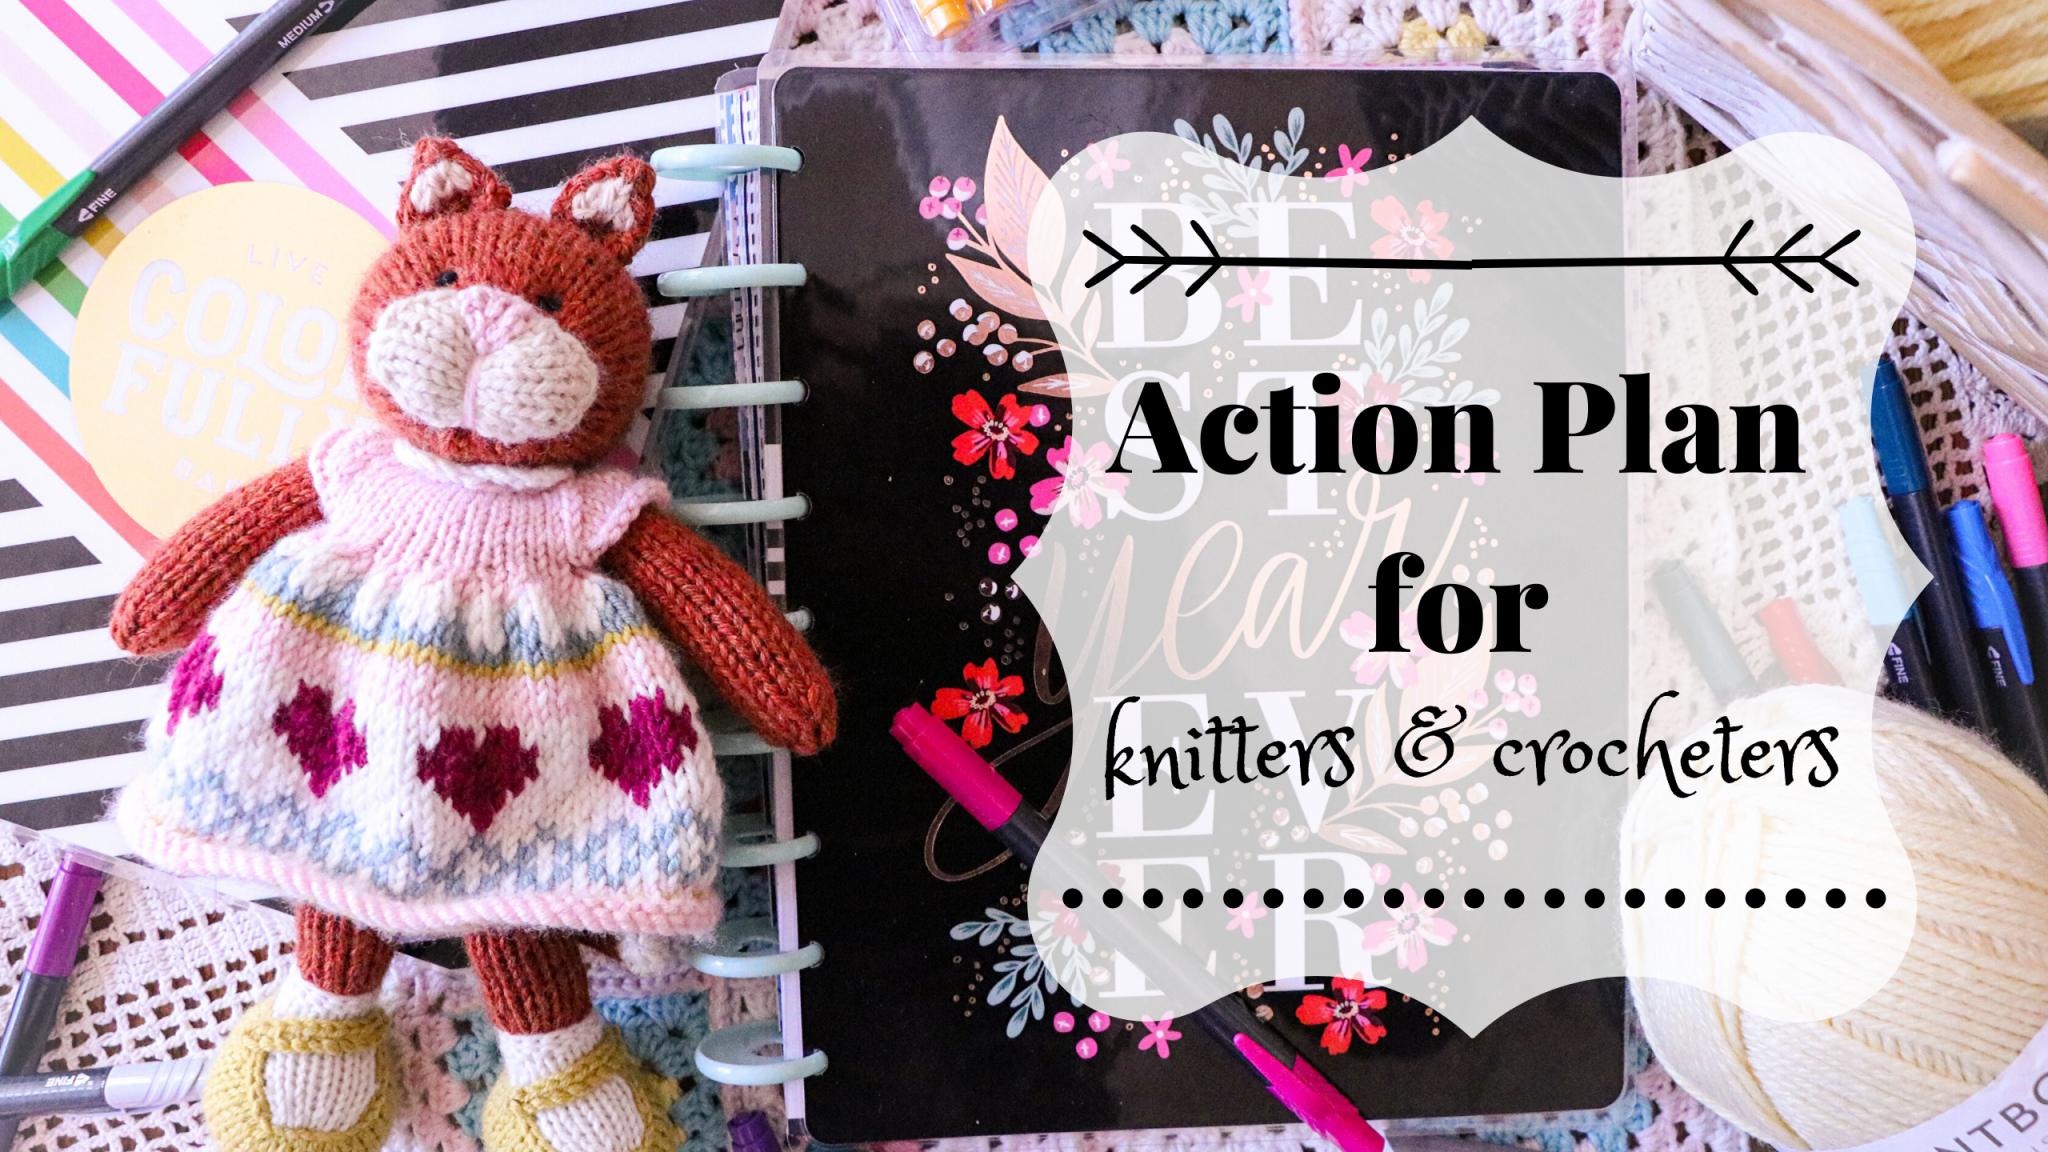 Action Plan for Knitters & Crocheters